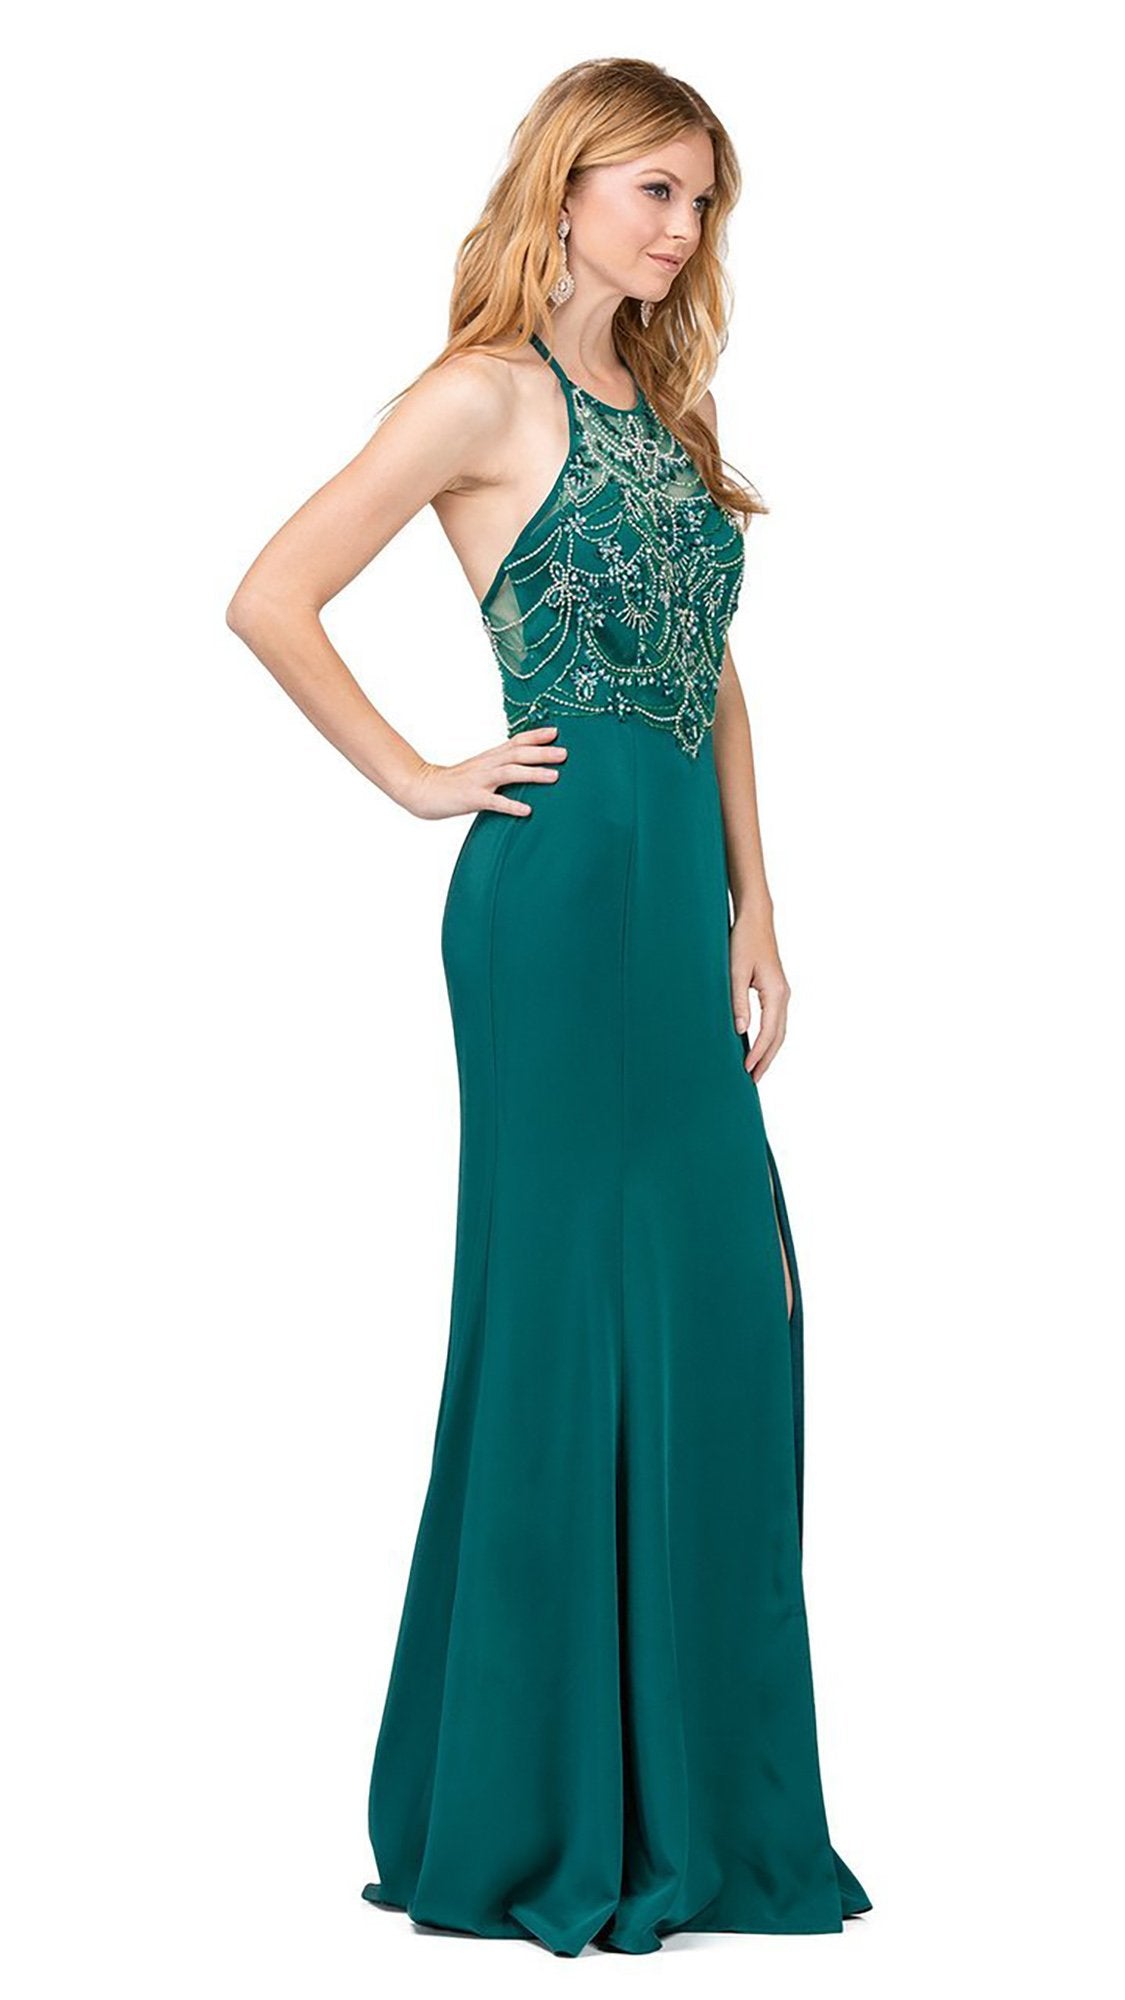 Dancing Queen Illusion Halter Jeweled Garland Motif Sheath Gown - 1 pc Hunter Green In Size M Available In Green